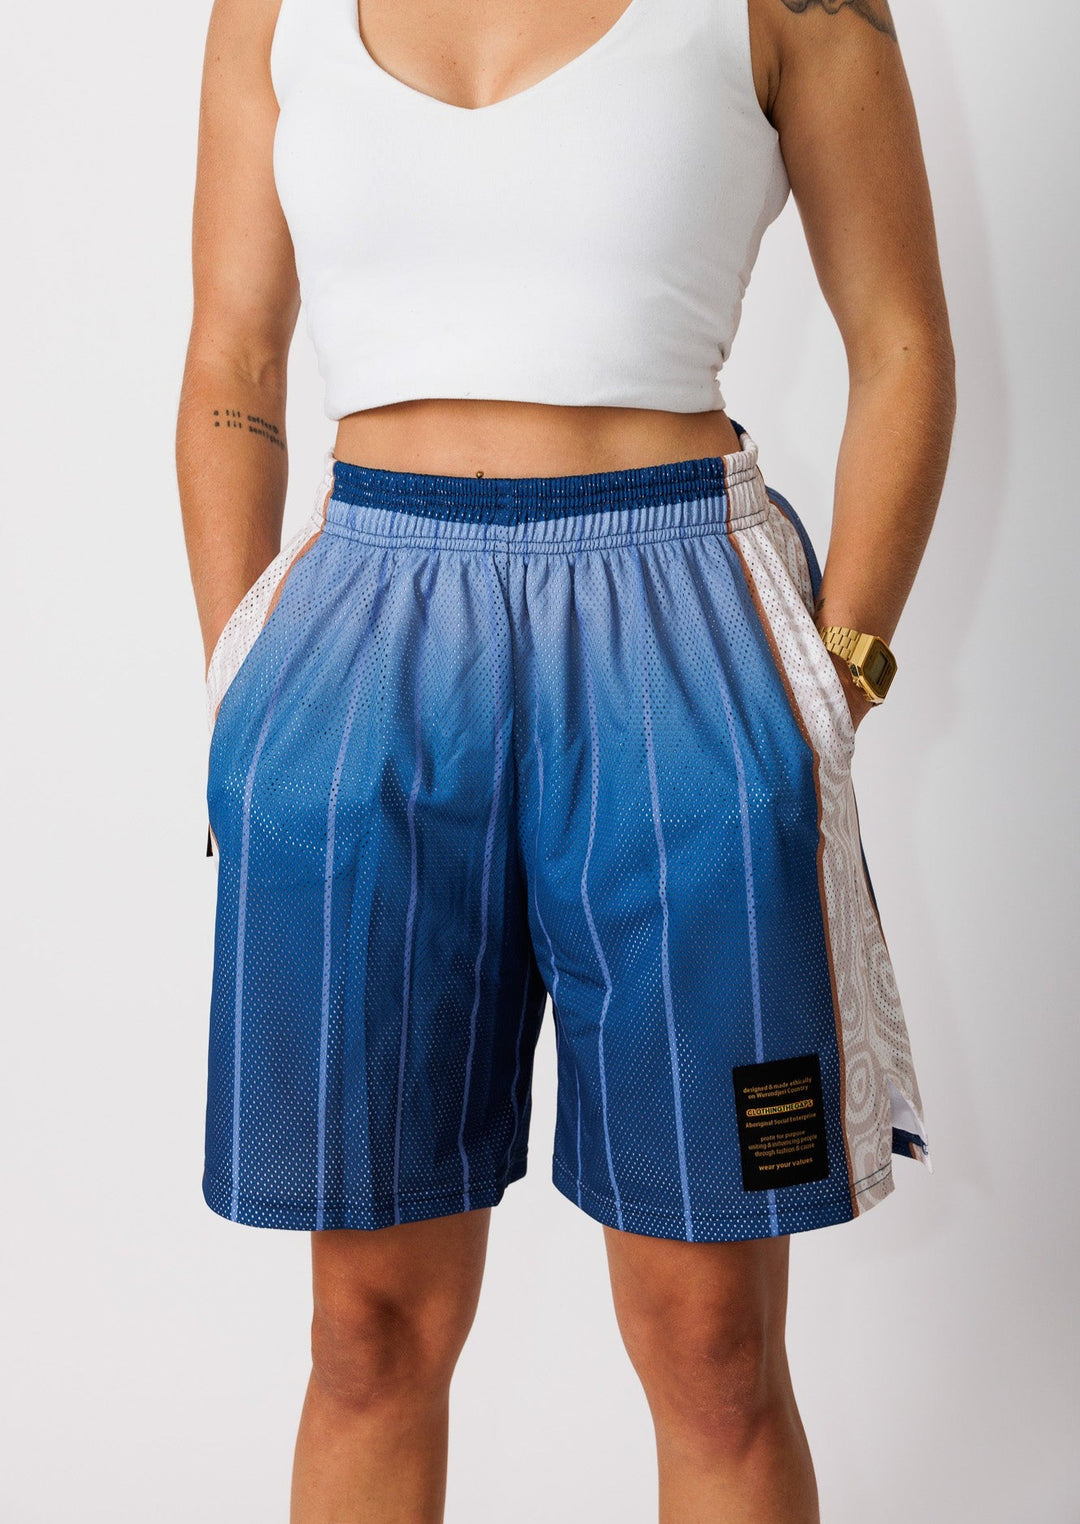 Clothing The Gaps. Naarm Basketball Shorts. Retro look with Mesh retro look crafted with a sublimated blue gradient finish light blue vertical lines going down leg. Cream/tan aboriginal  artwork strip going down side of both legs. Has a elastic waist, deep pockets and clothing the gaps patch on corner of left leg. 